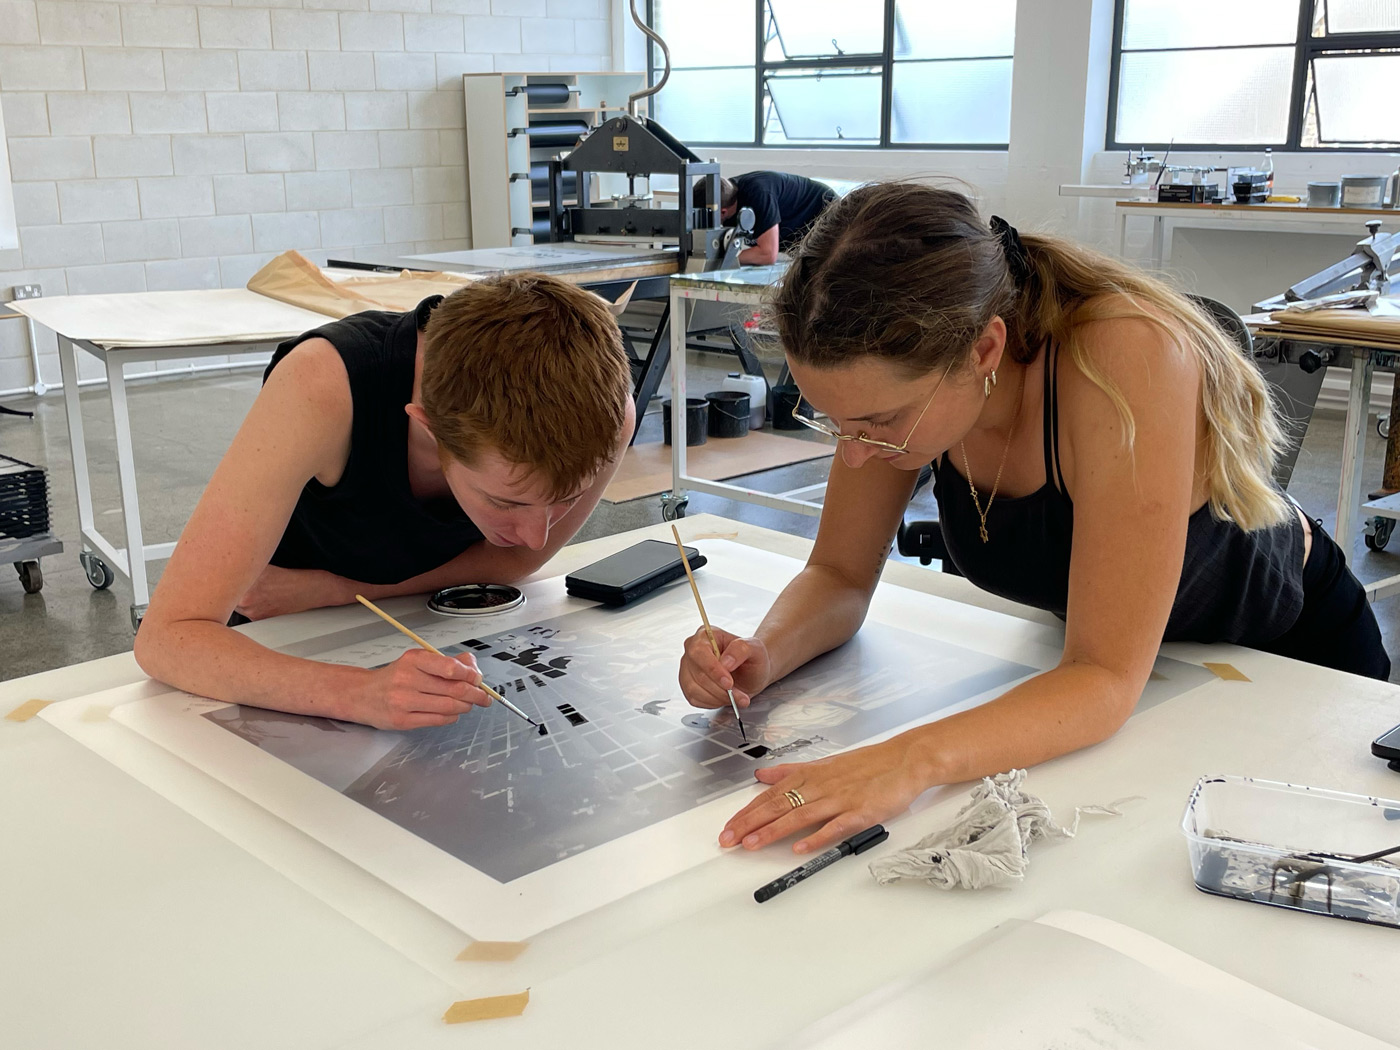 Hannah Quinlan and Rosie Hastings working on their print at Counter Studio, Margate